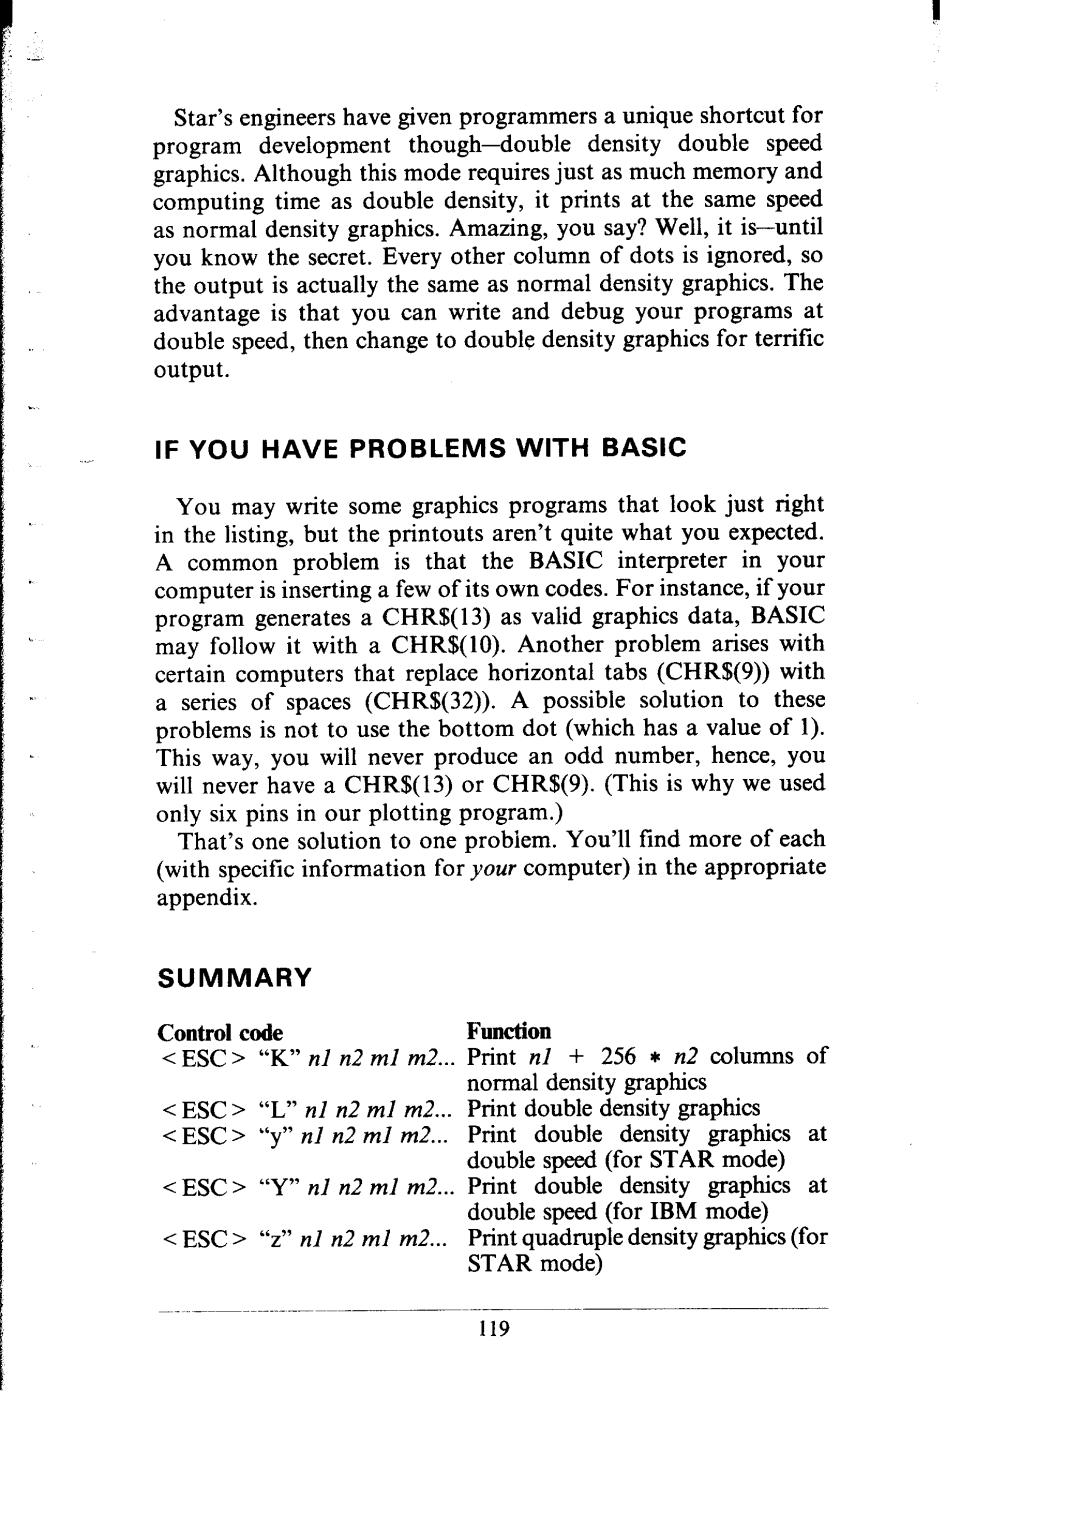 Star Micronics SR-10/I5 user manual Star’s engineers have given programmers a unique shortcut for 